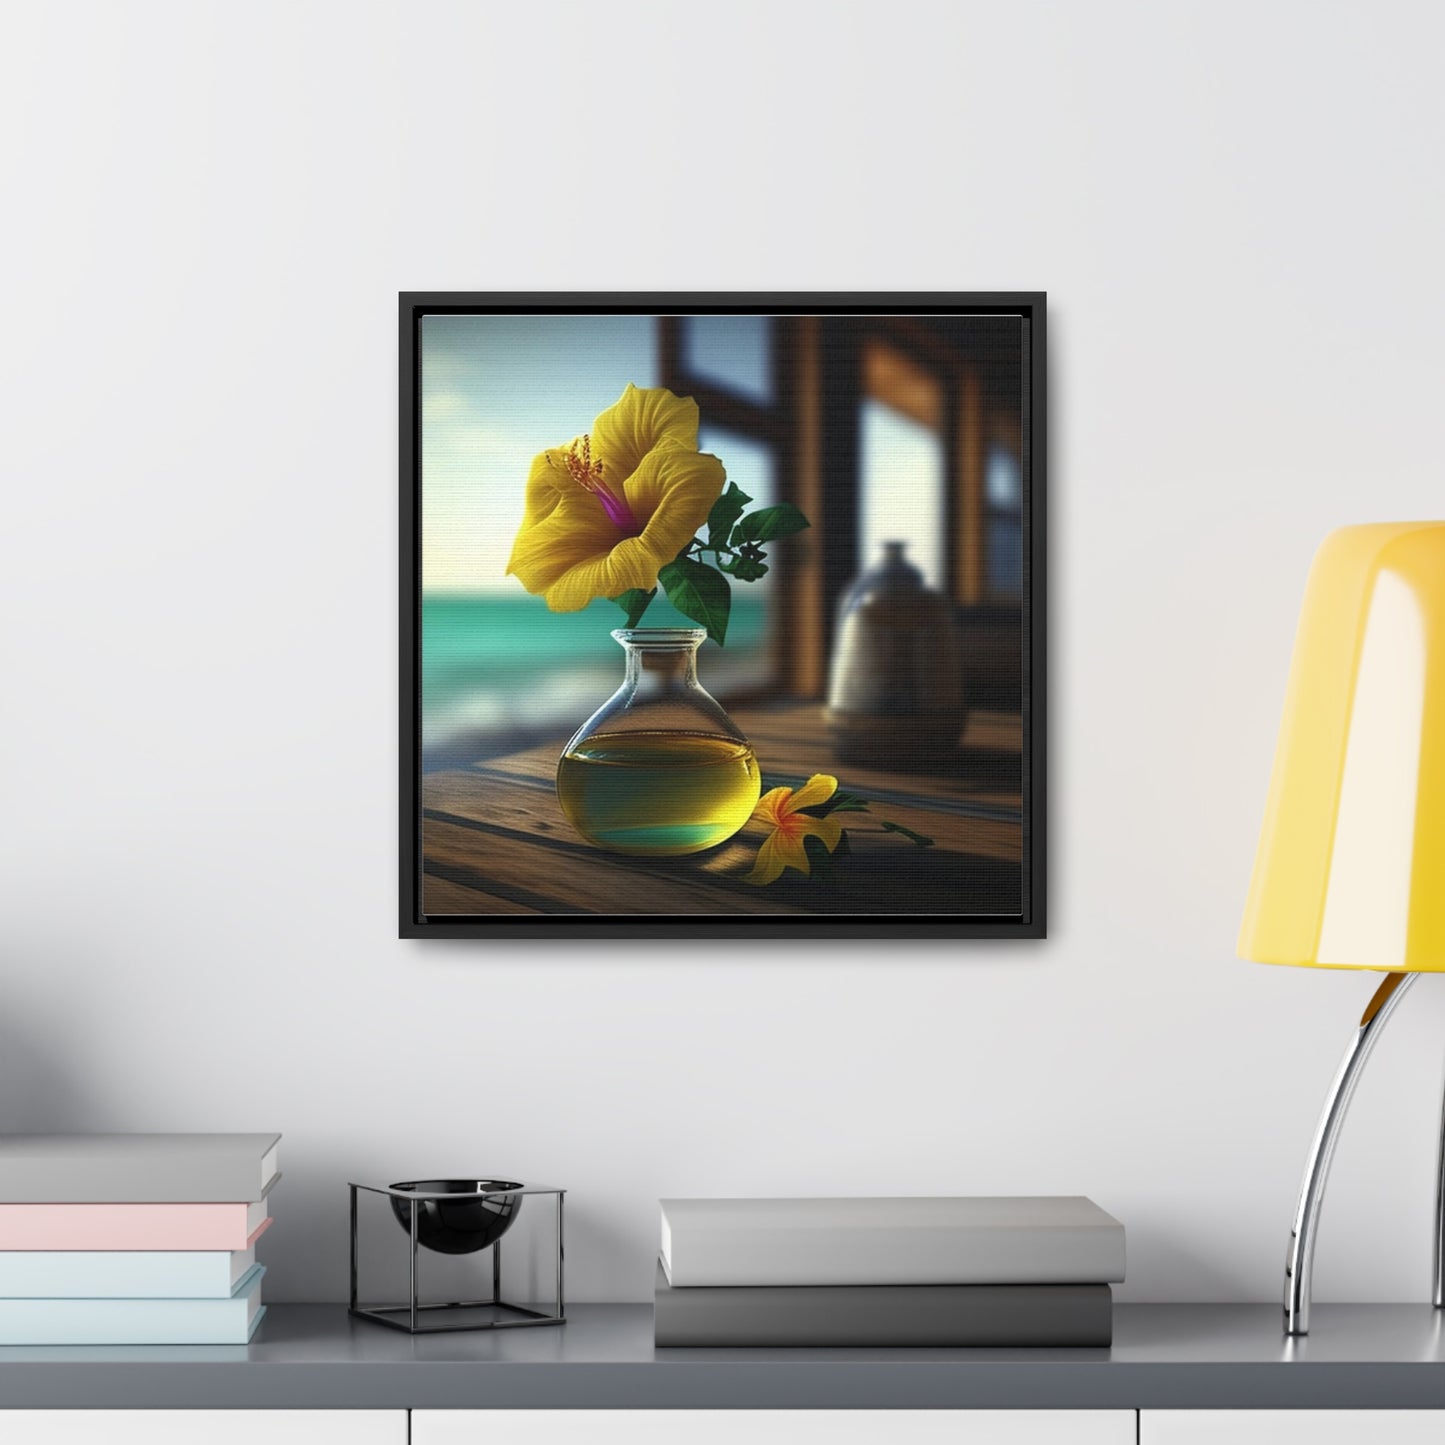 Gallery Canvas Wraps, Square Frame Yellow Hibiscus Wood 1